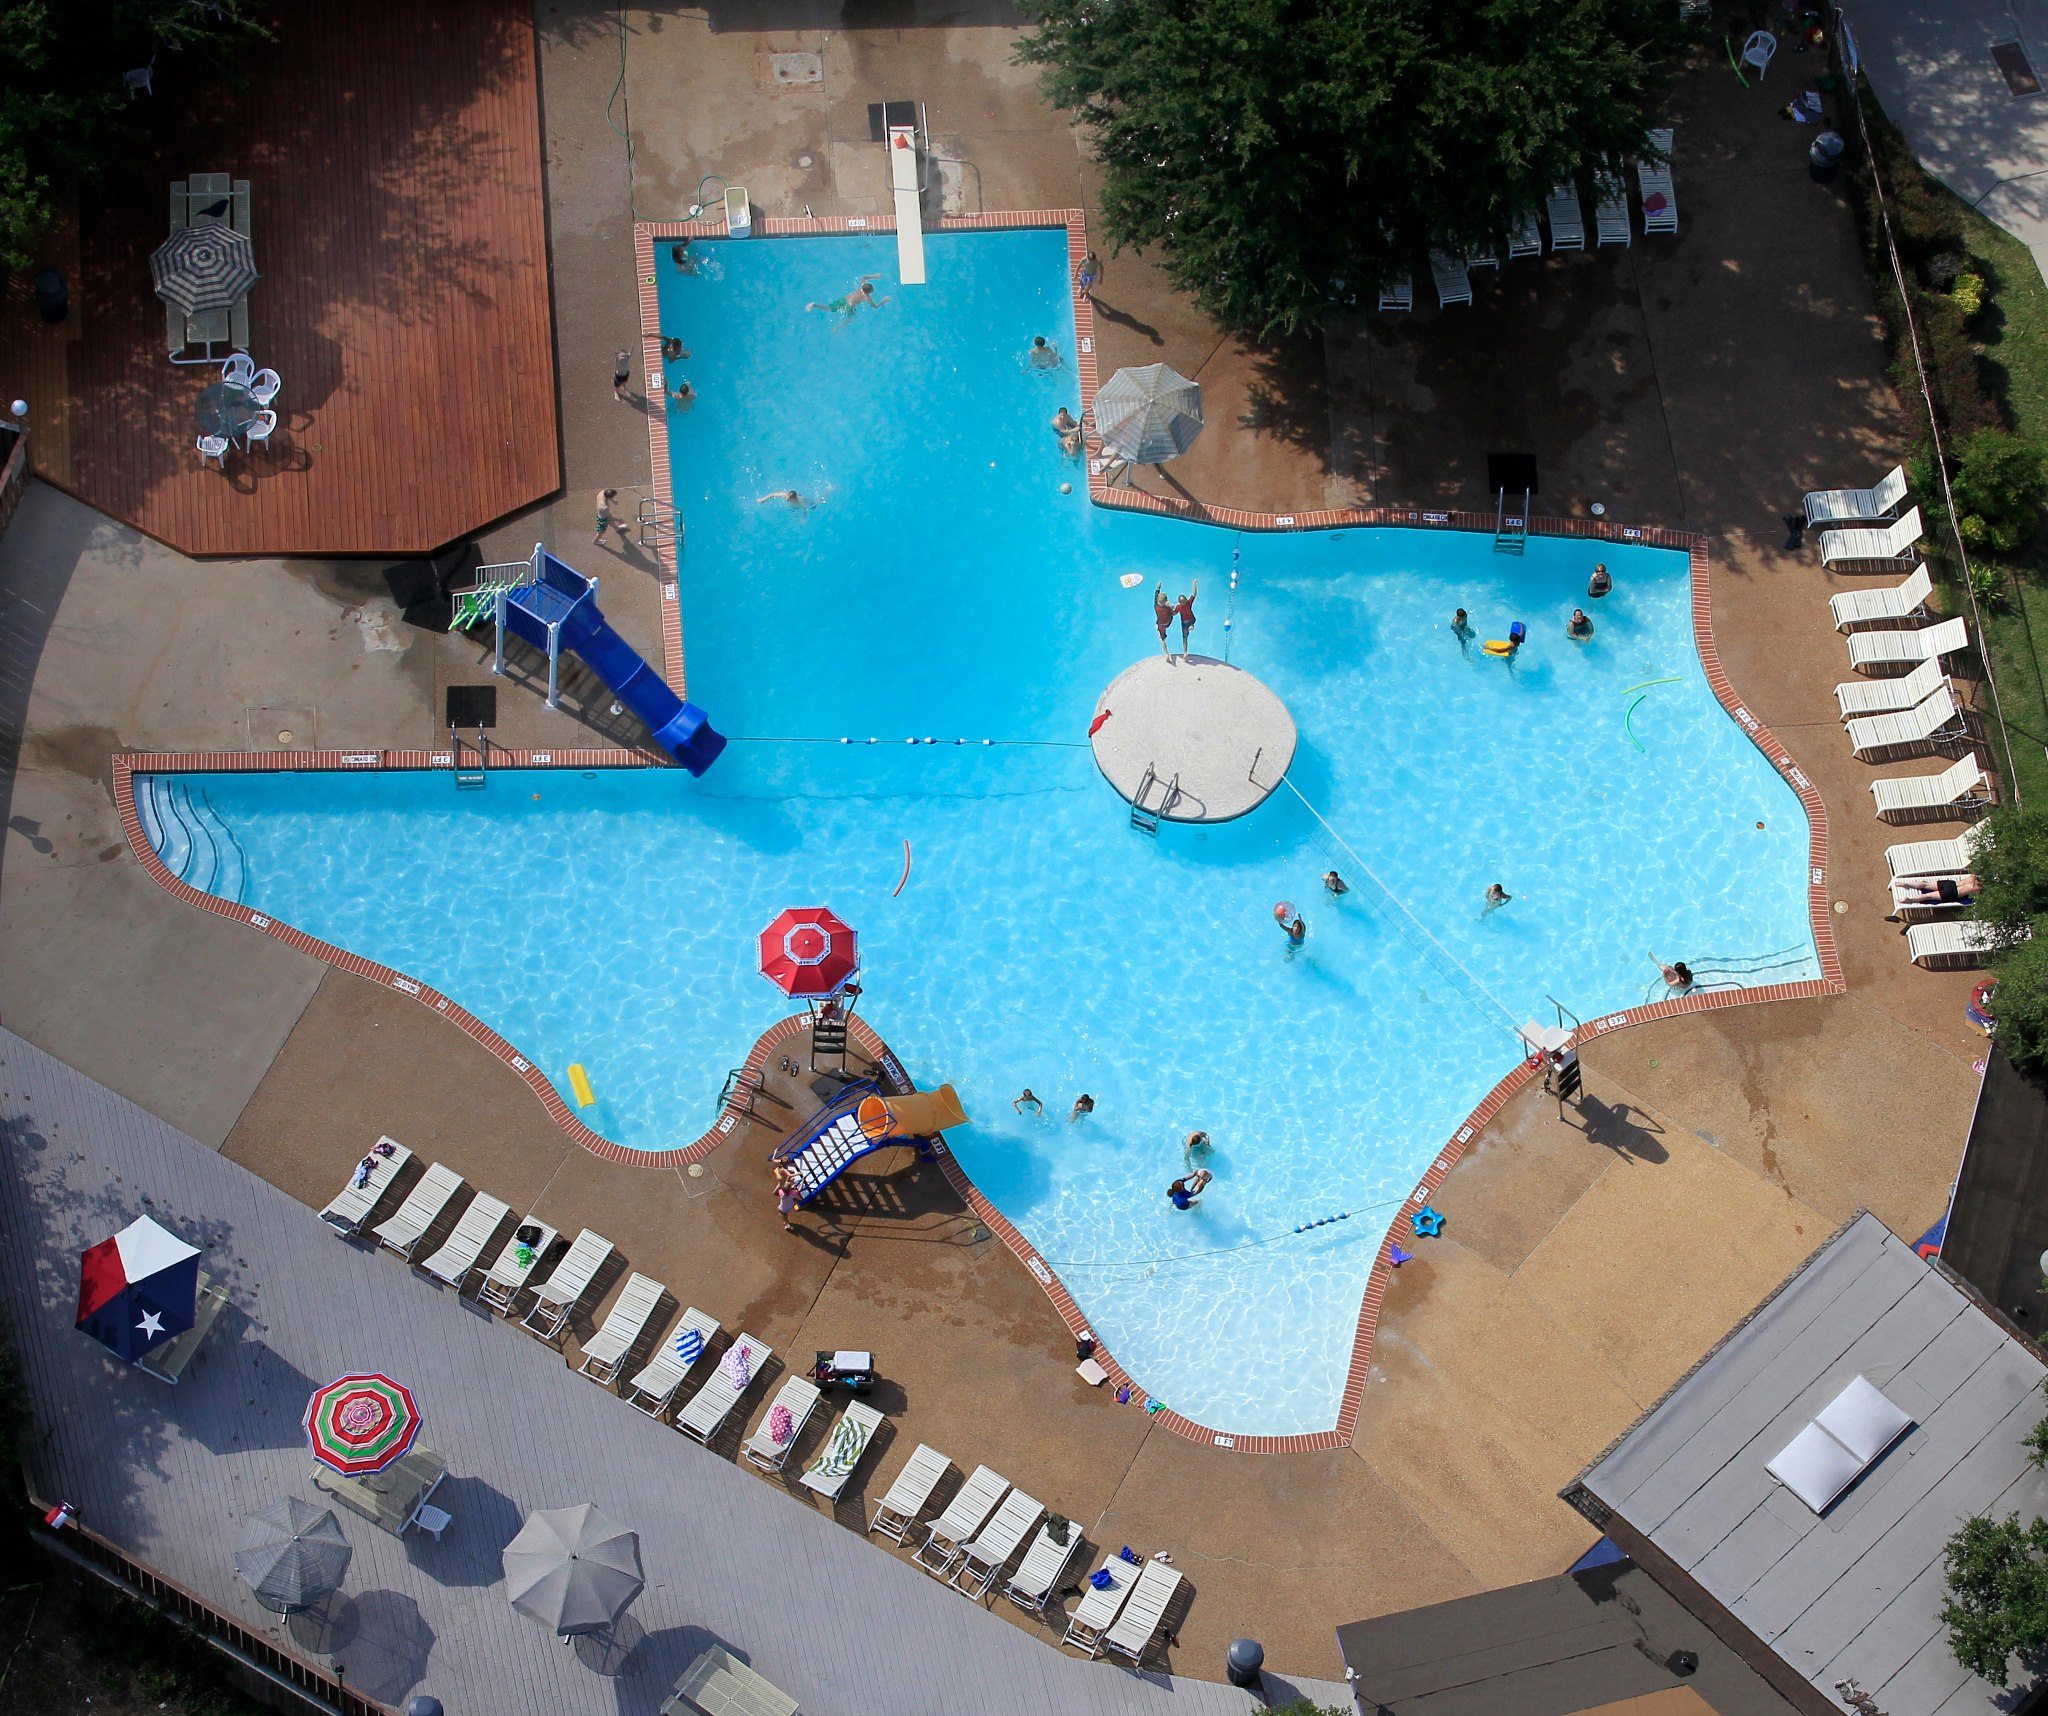 20 Top Things to Do in Plano - The Texas Pool aerial